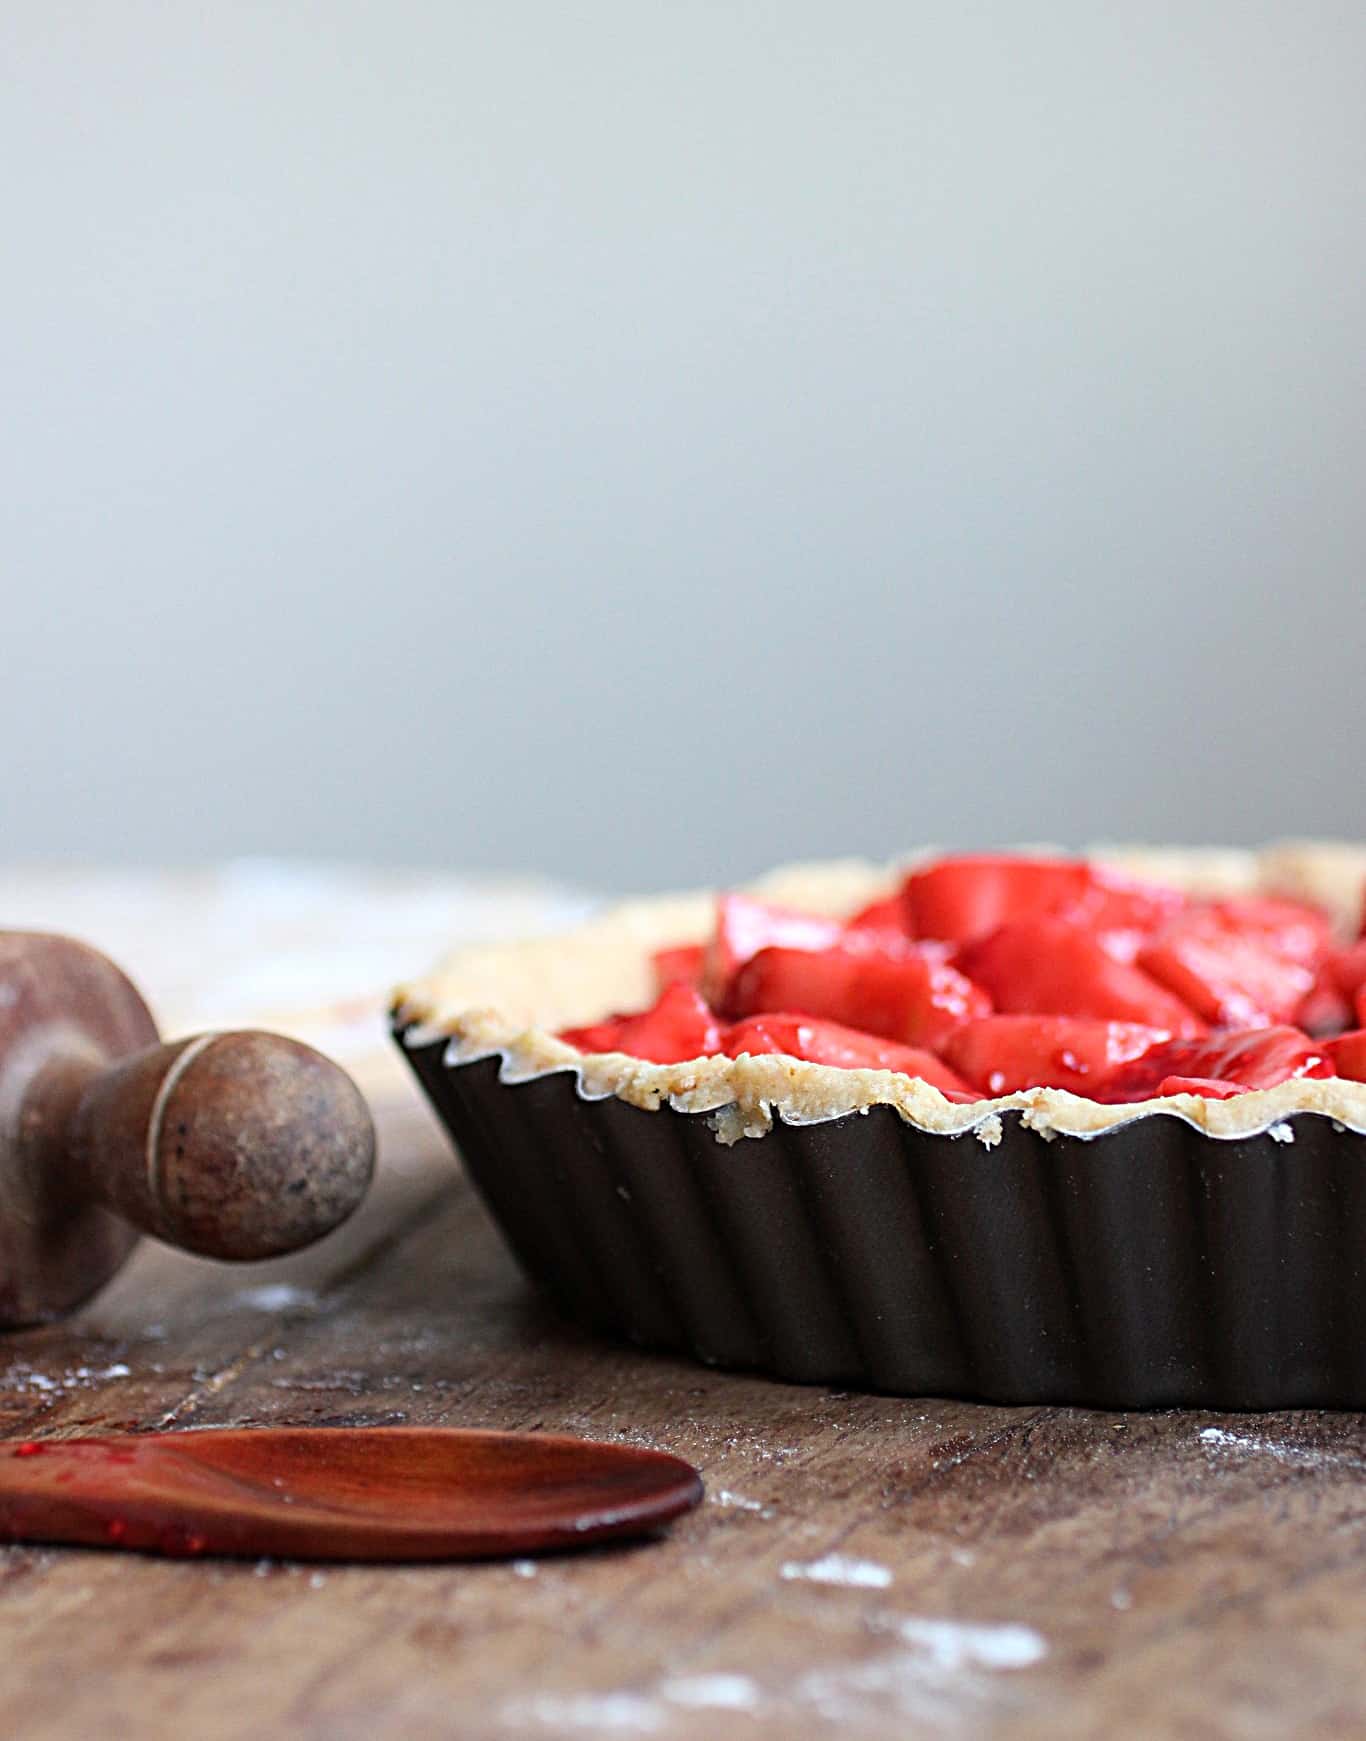 Metal pie pan with red filling on wooden table, rolling pin and wooden spoon